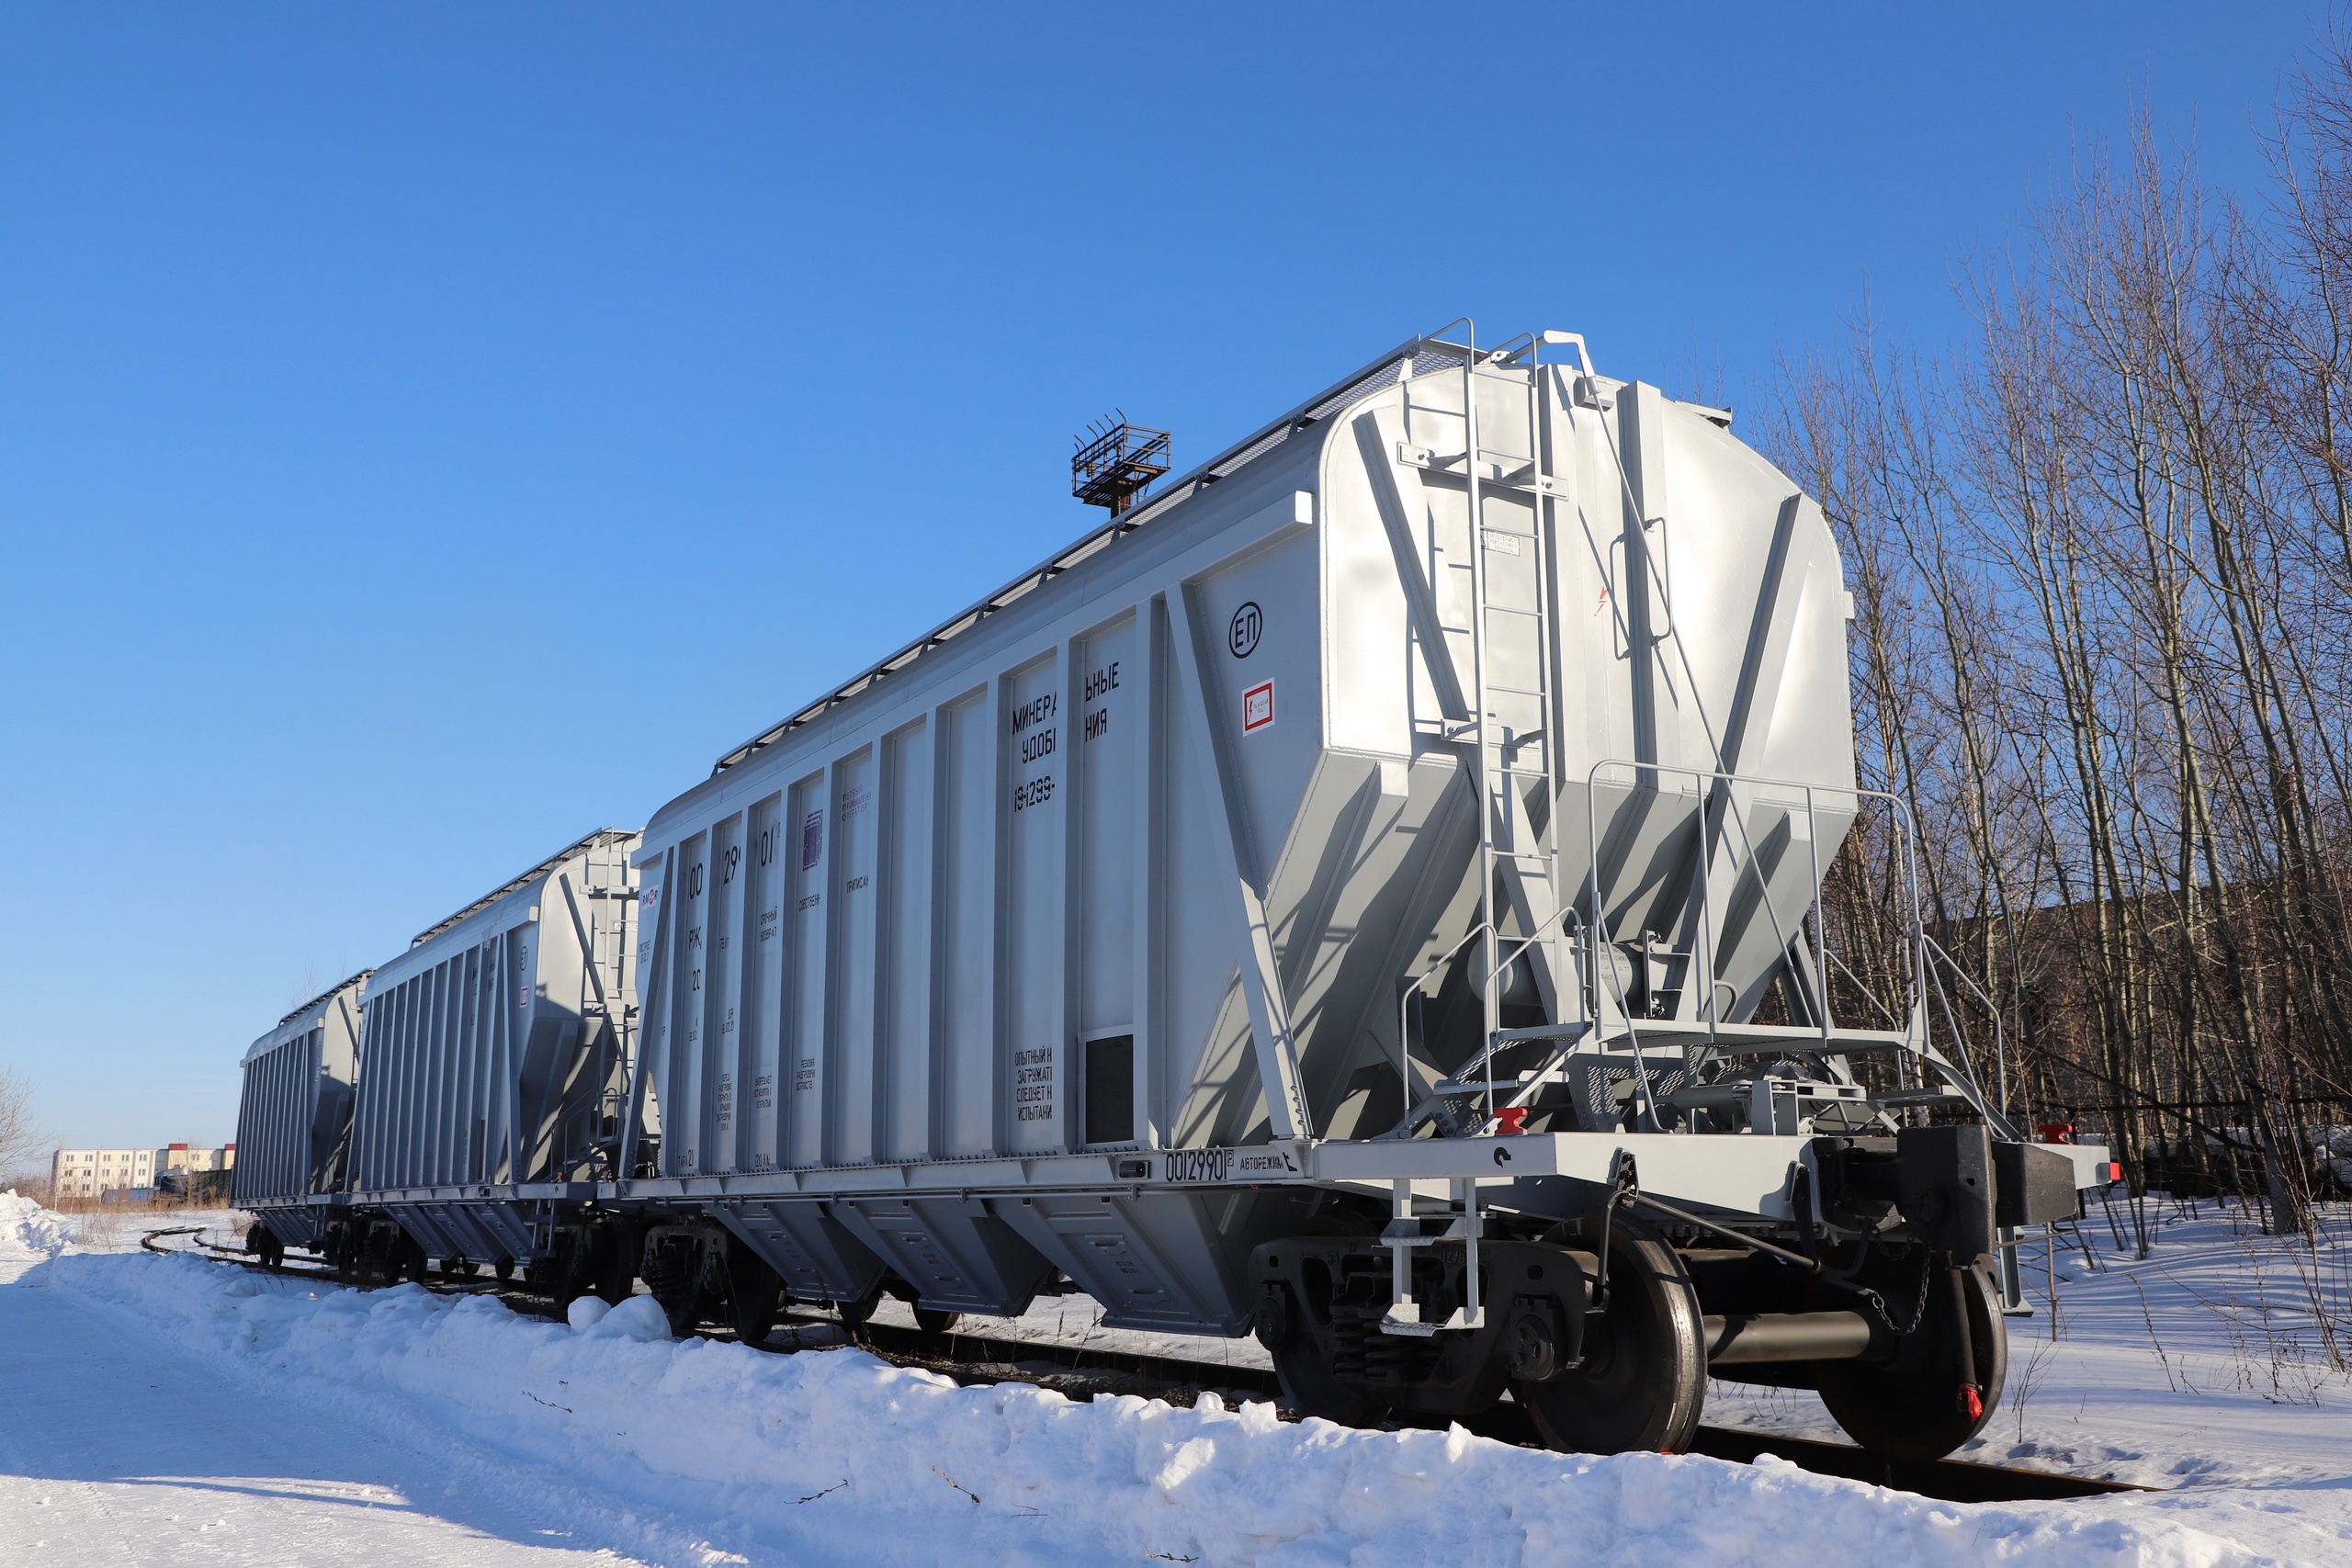 Presentation of initial batch of 19-1299-01 hopper wagons in March 2022.